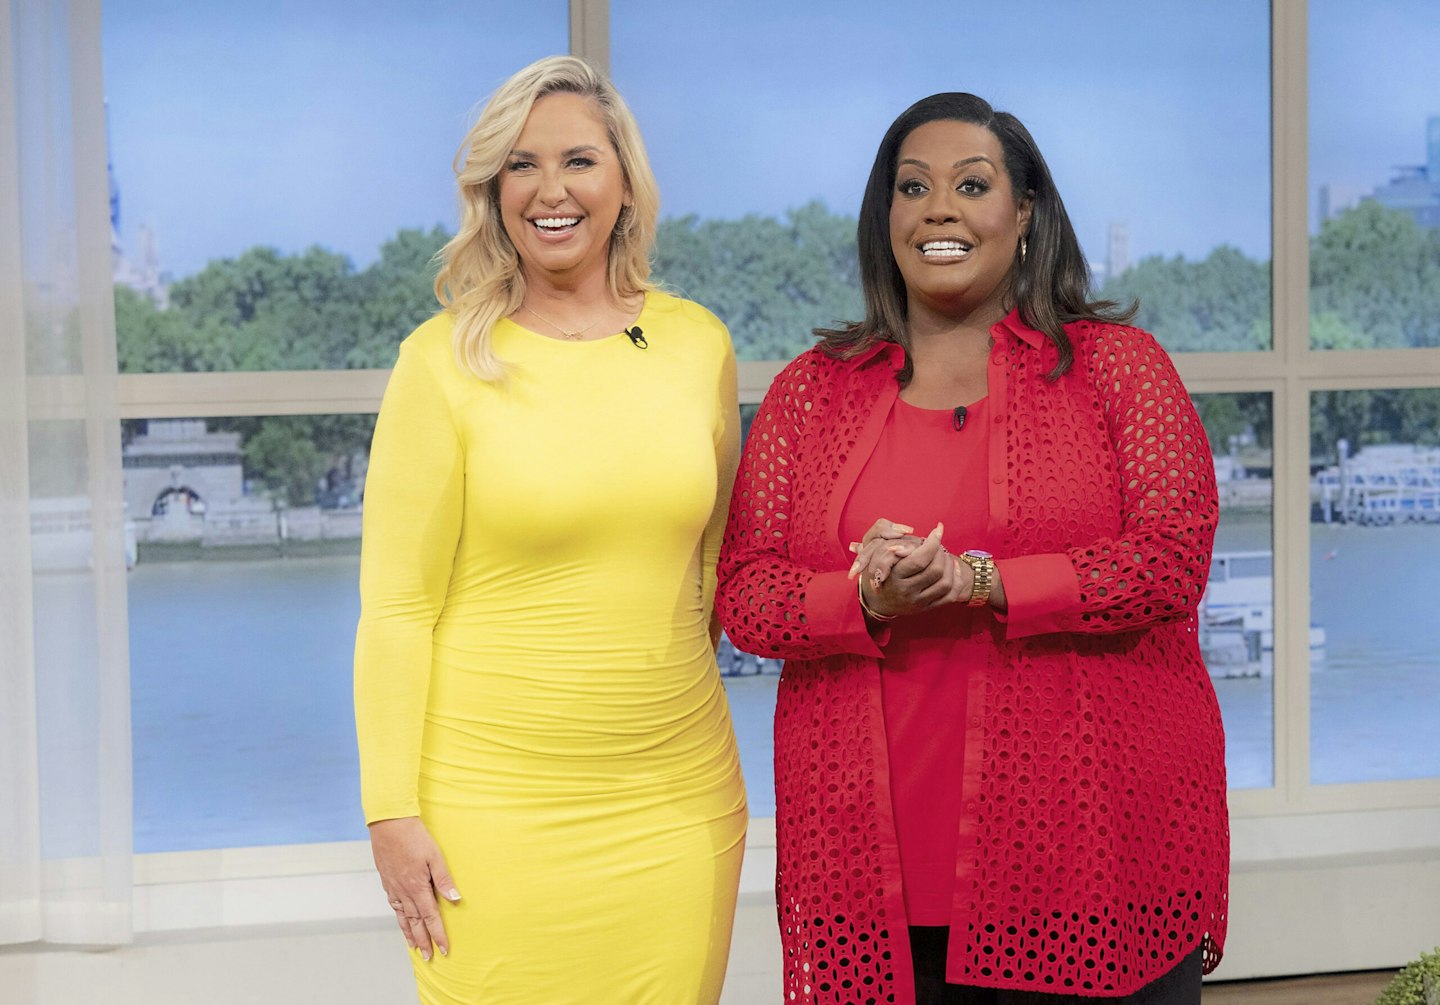 Josie Gibson and Alison Hammond on This Morning